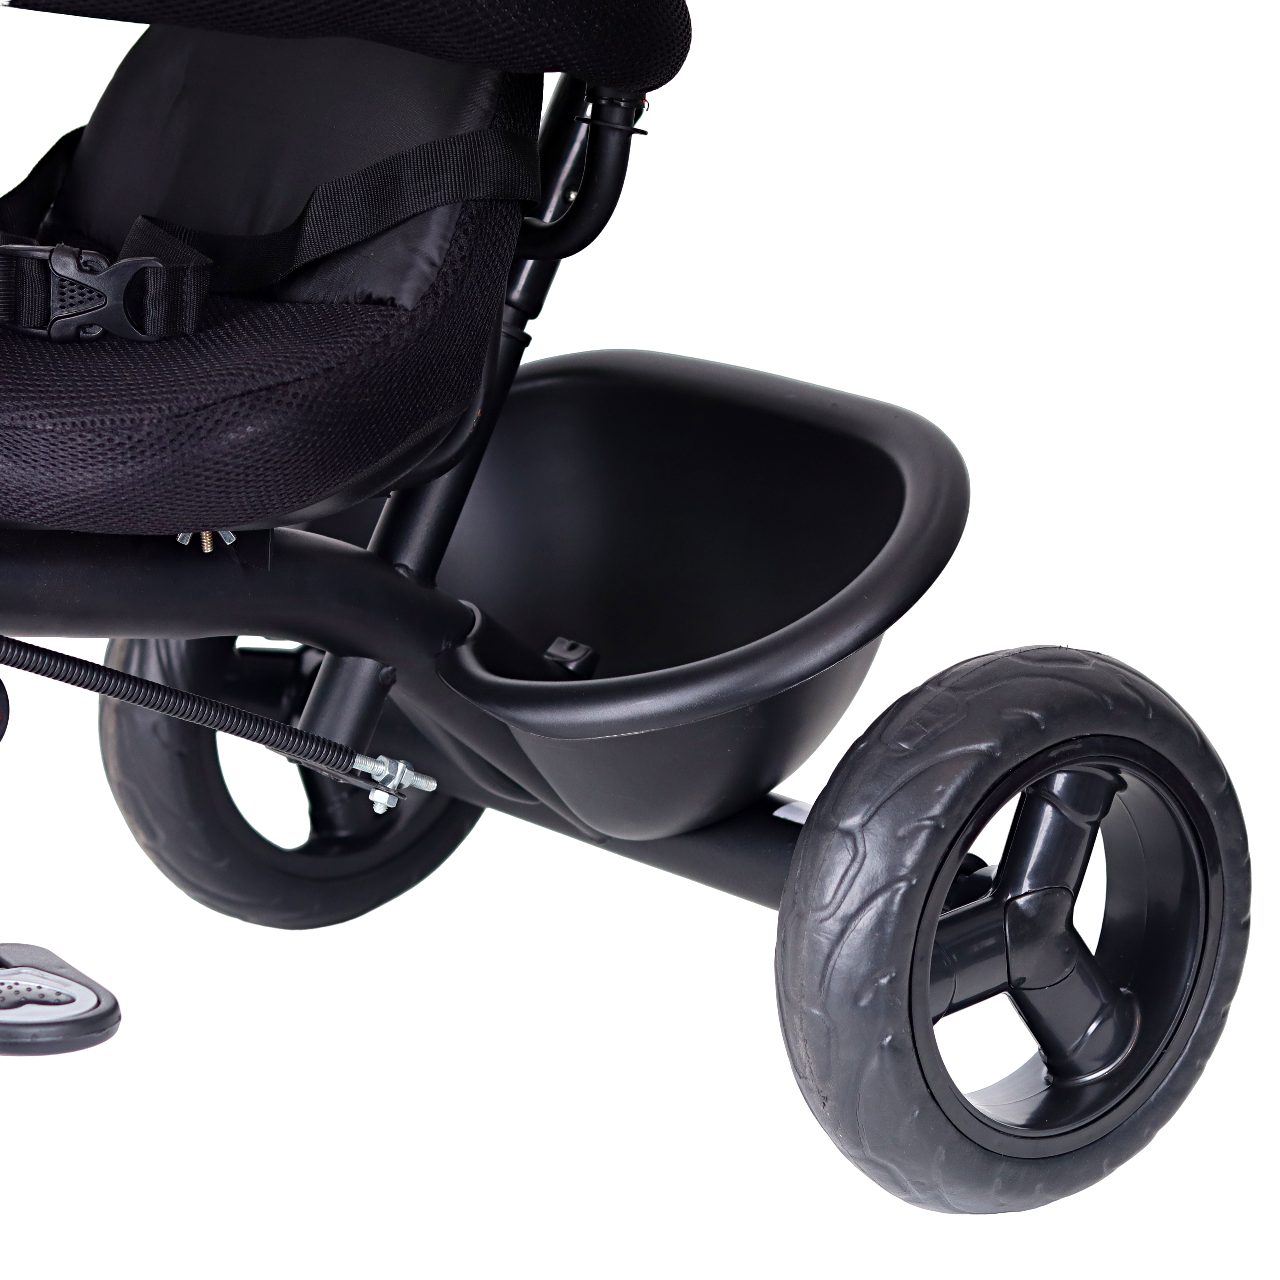 Luusa R1 500 Pro Tricycle for Kids - Hooded, Adjustable, and Safe